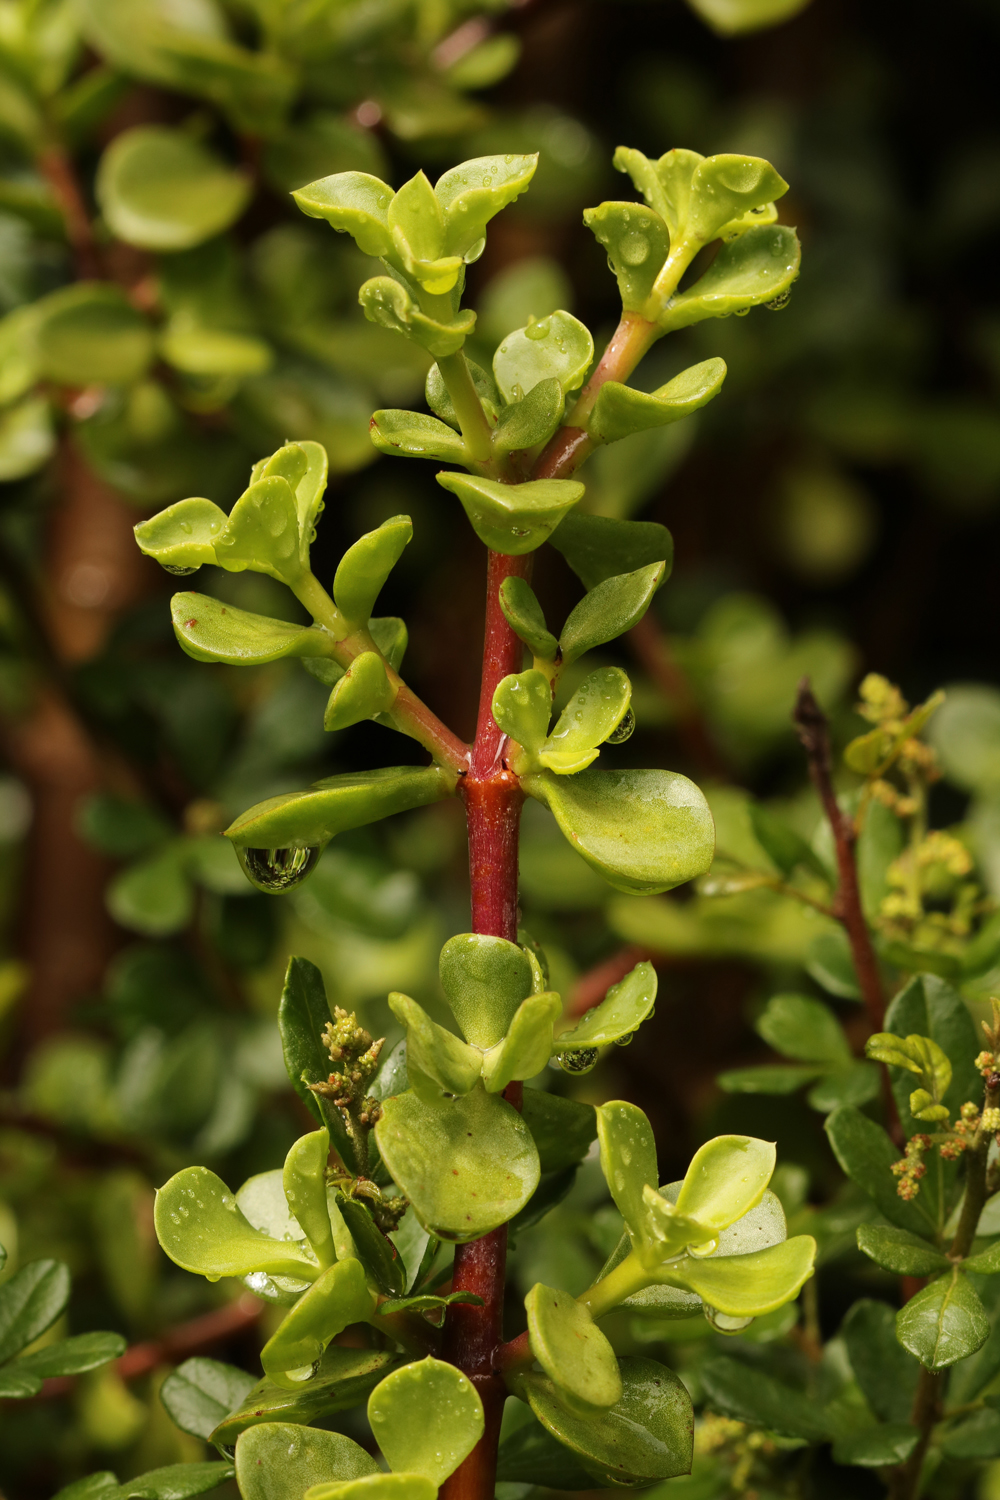 A branch of a Pork Bush, or Spekboom, the South African name, Latin name Portulacaria afra.